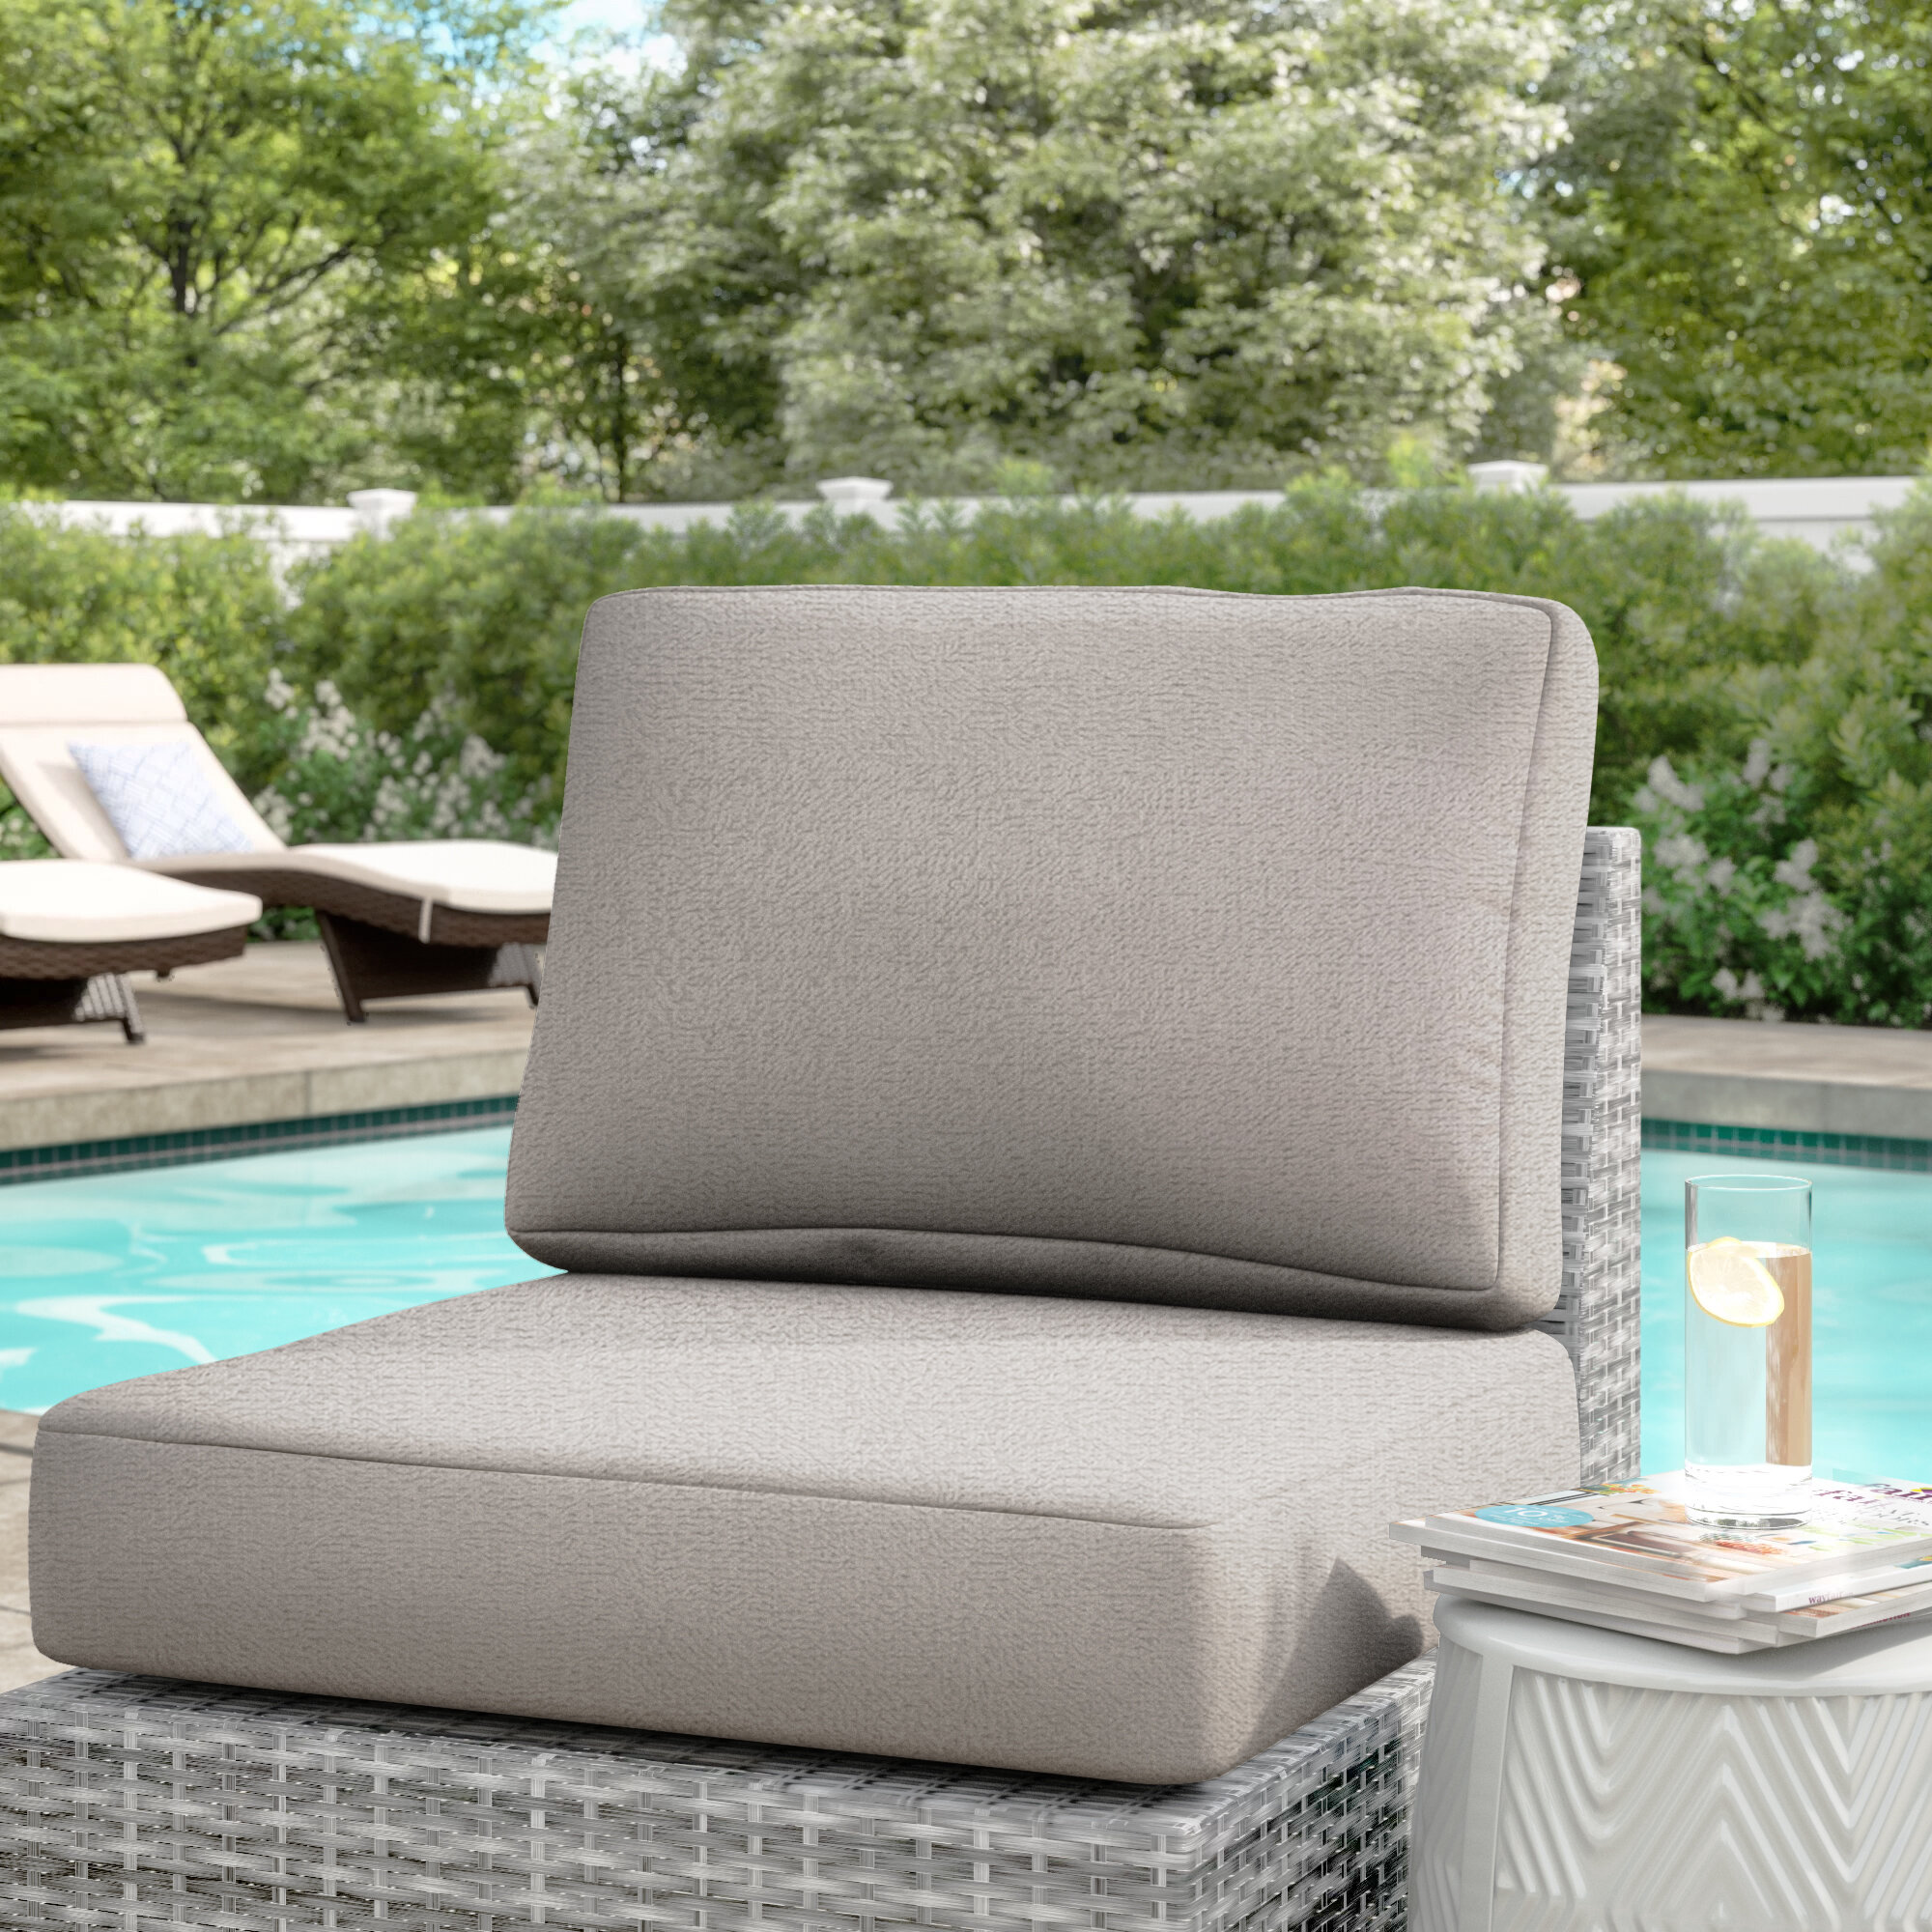 Outdoor Cushion Cover 